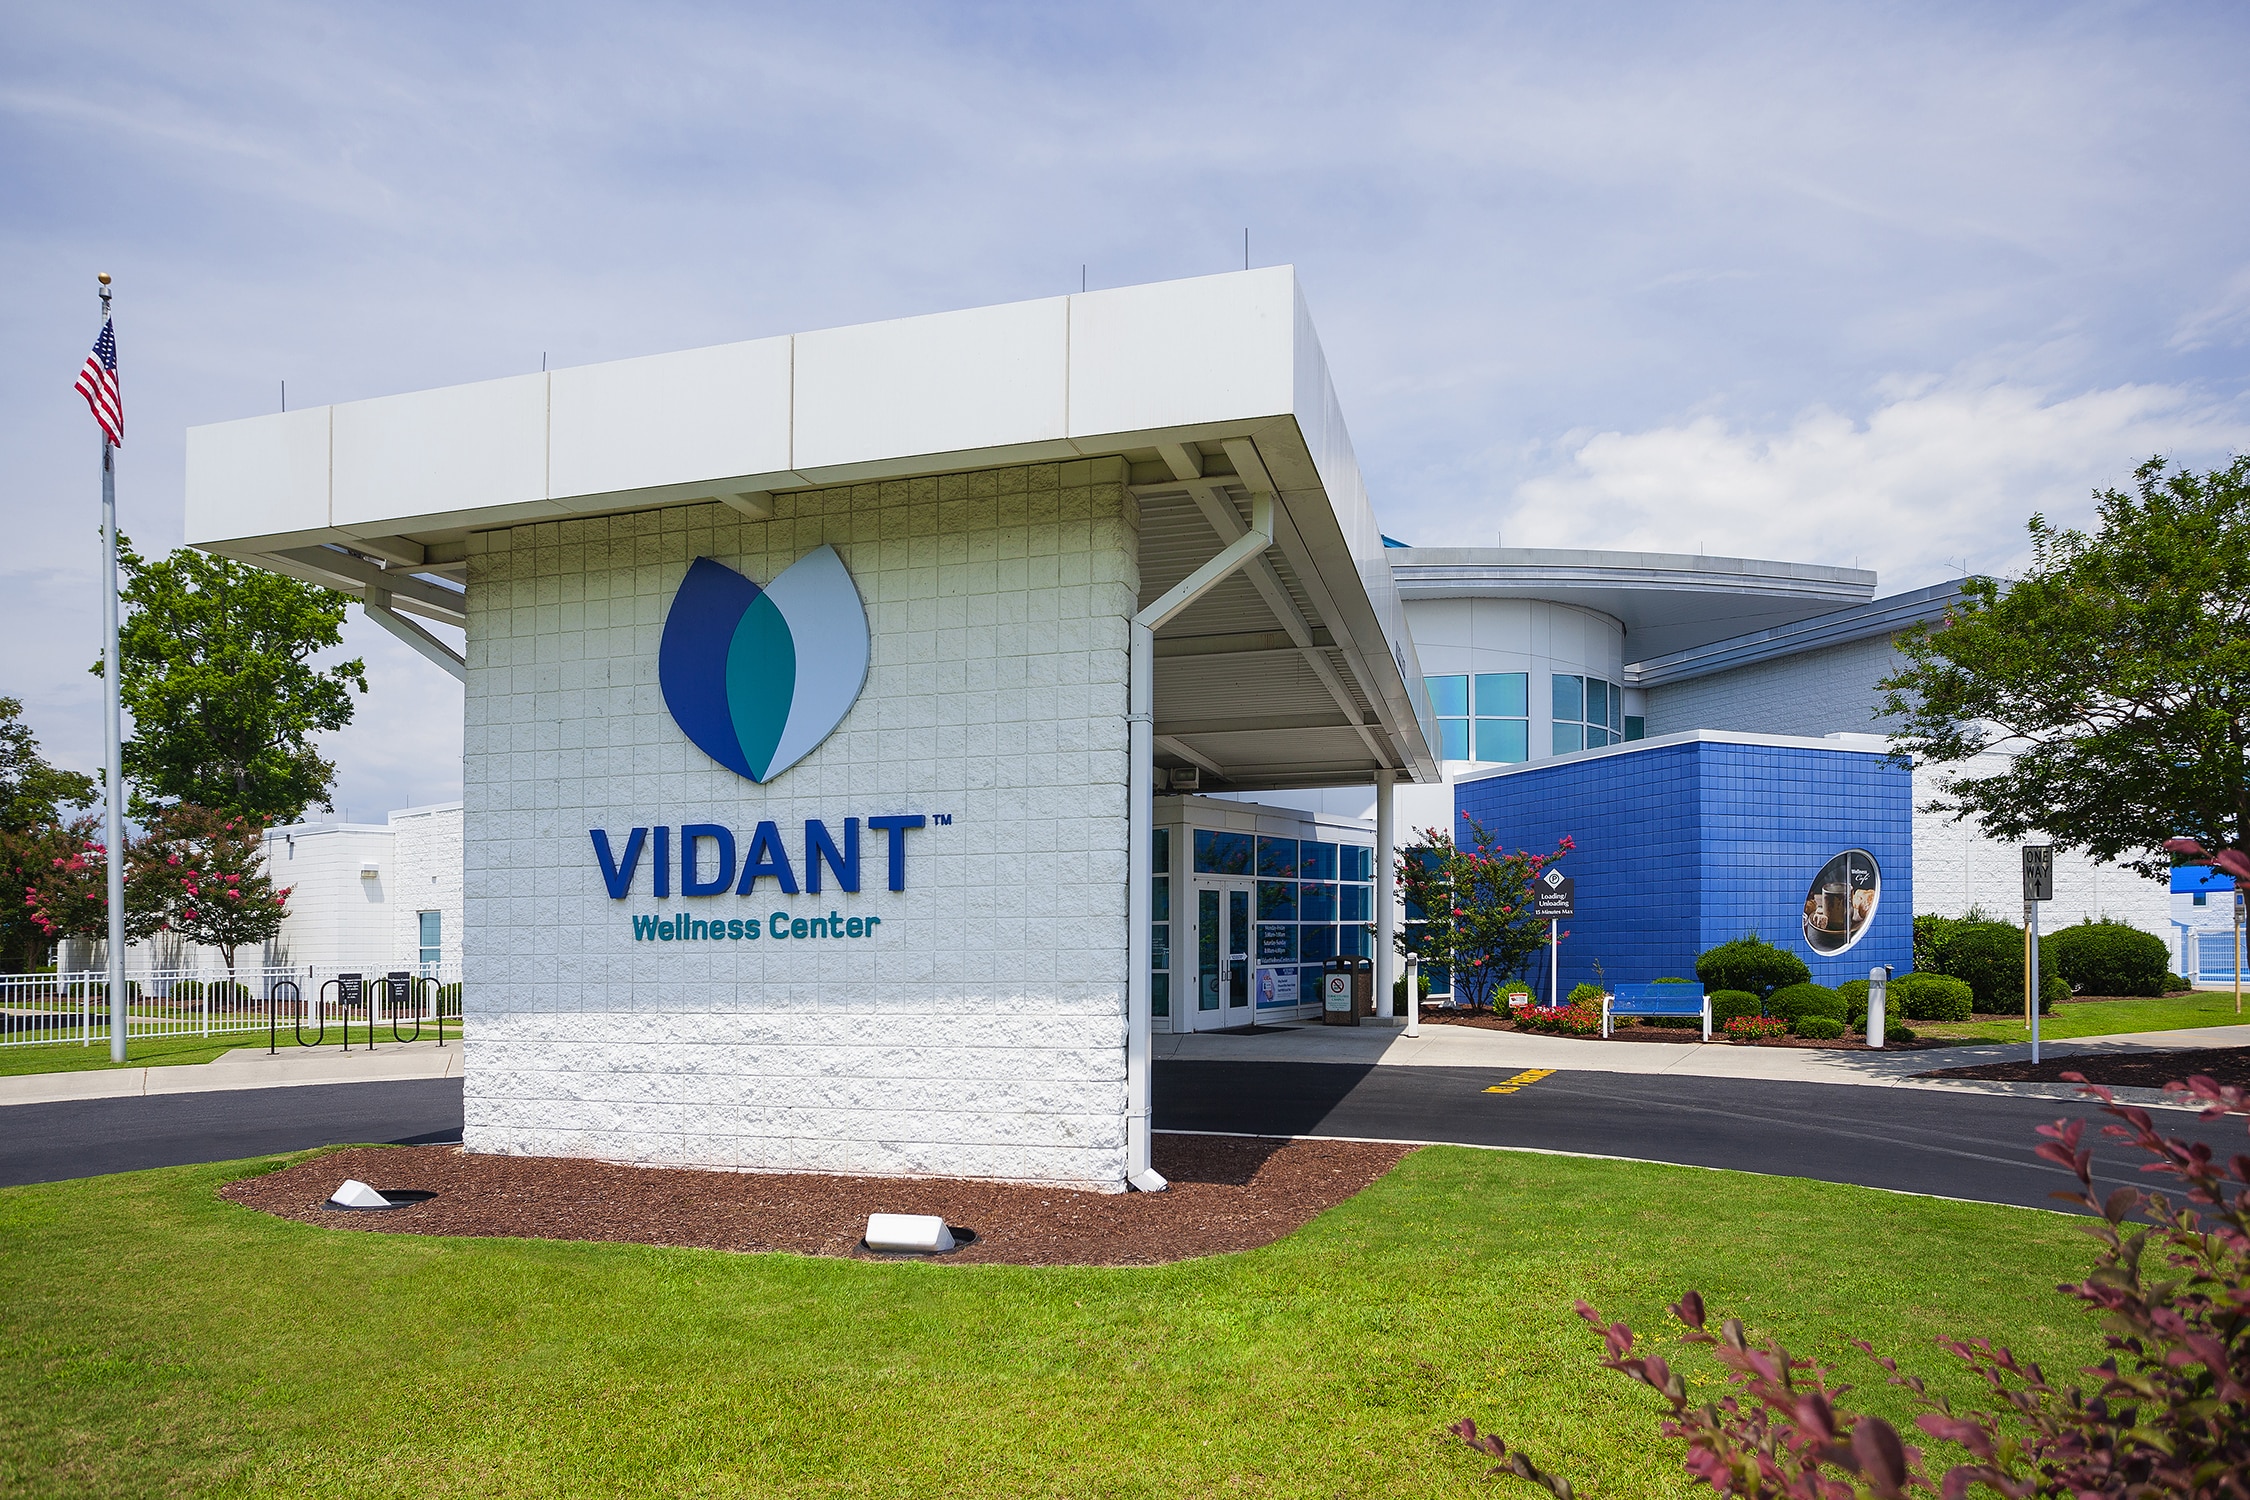 The outside of the Vidant Wellness Center in Greenville